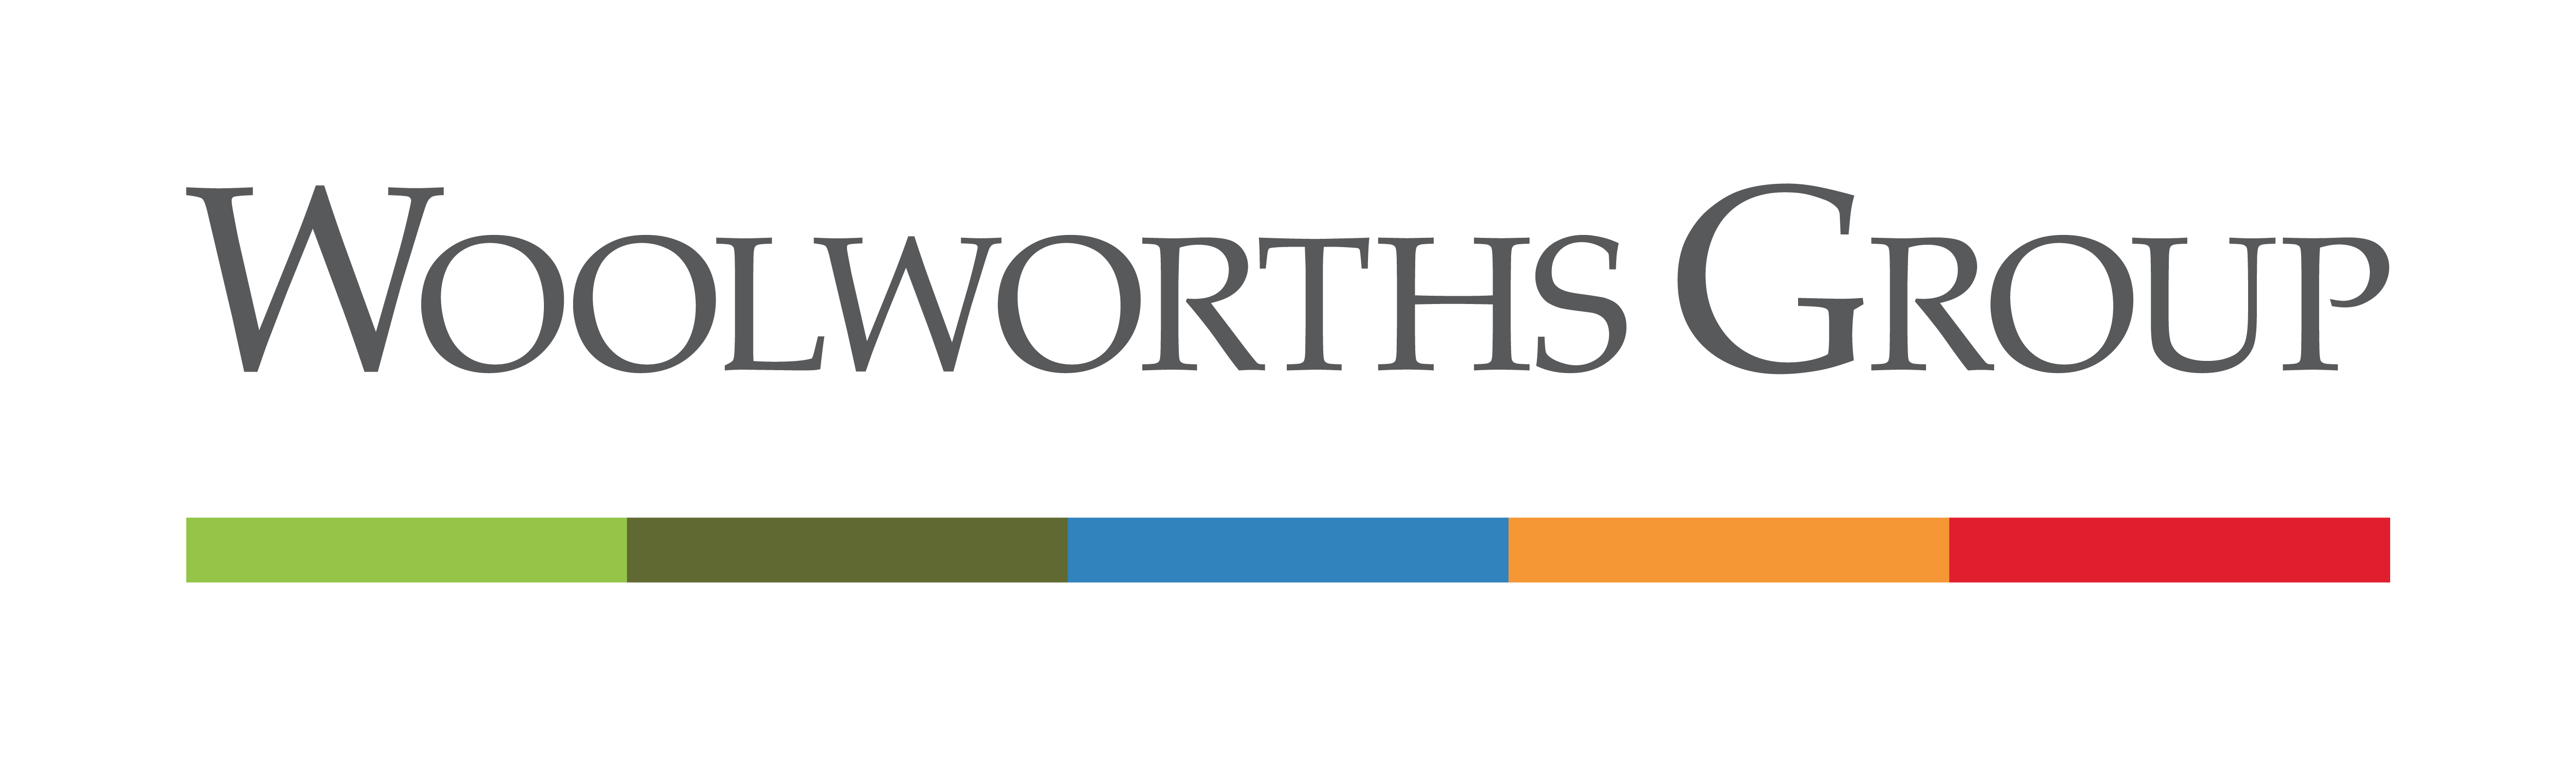 Woolworths Group Limited Logo